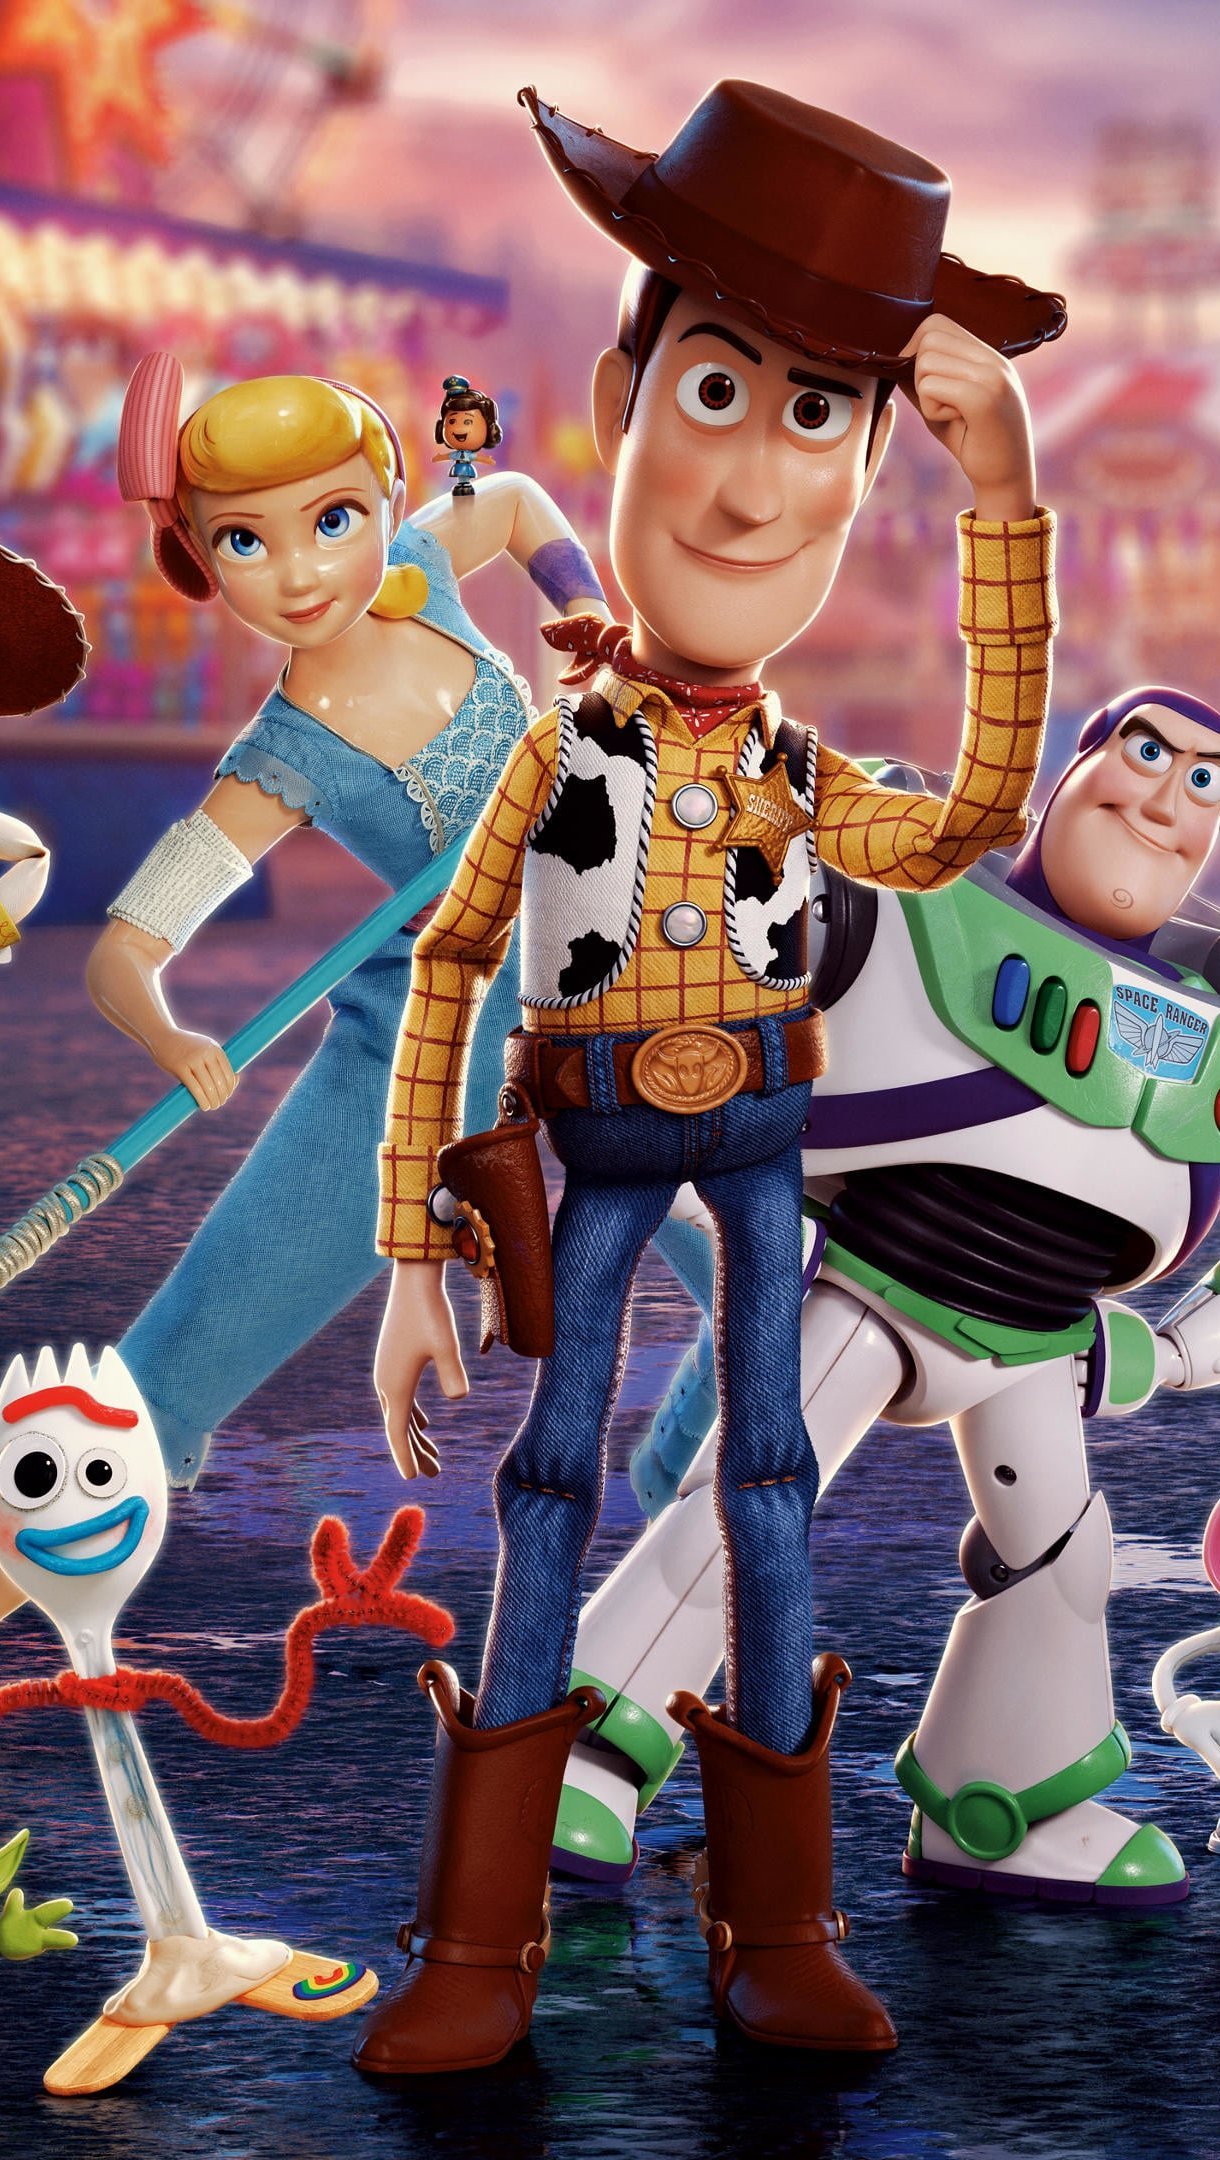 Toy Story 4 Characters Poster Wallpaper 4k Hd Id3326